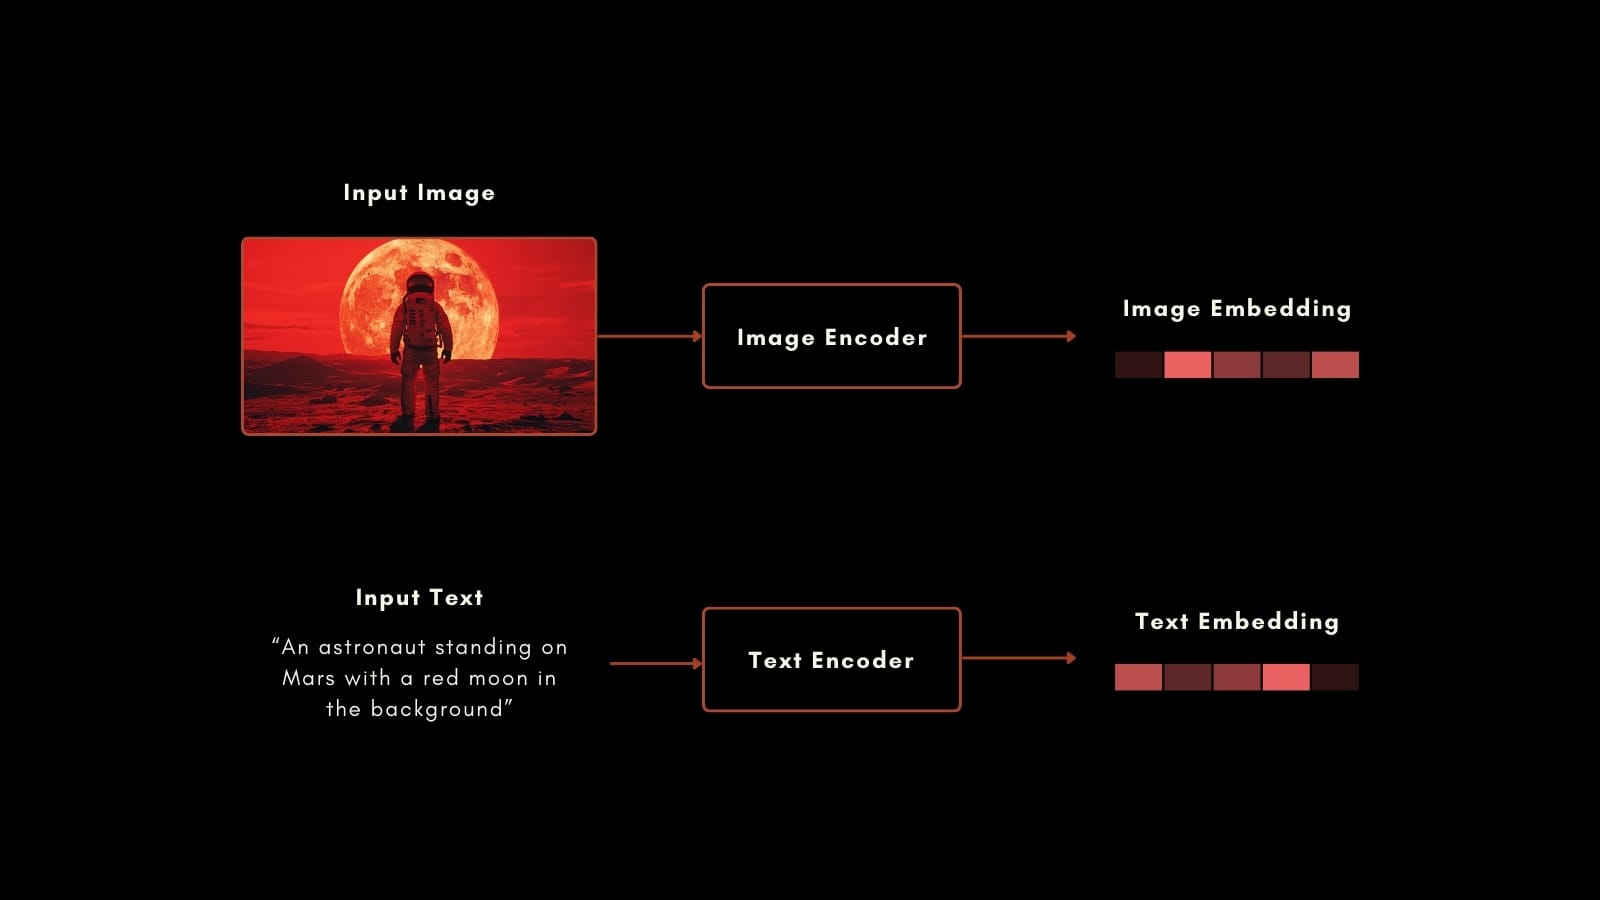 Diagram illustrating image to text translation using an astronaut on Mars with a red moon as an example.